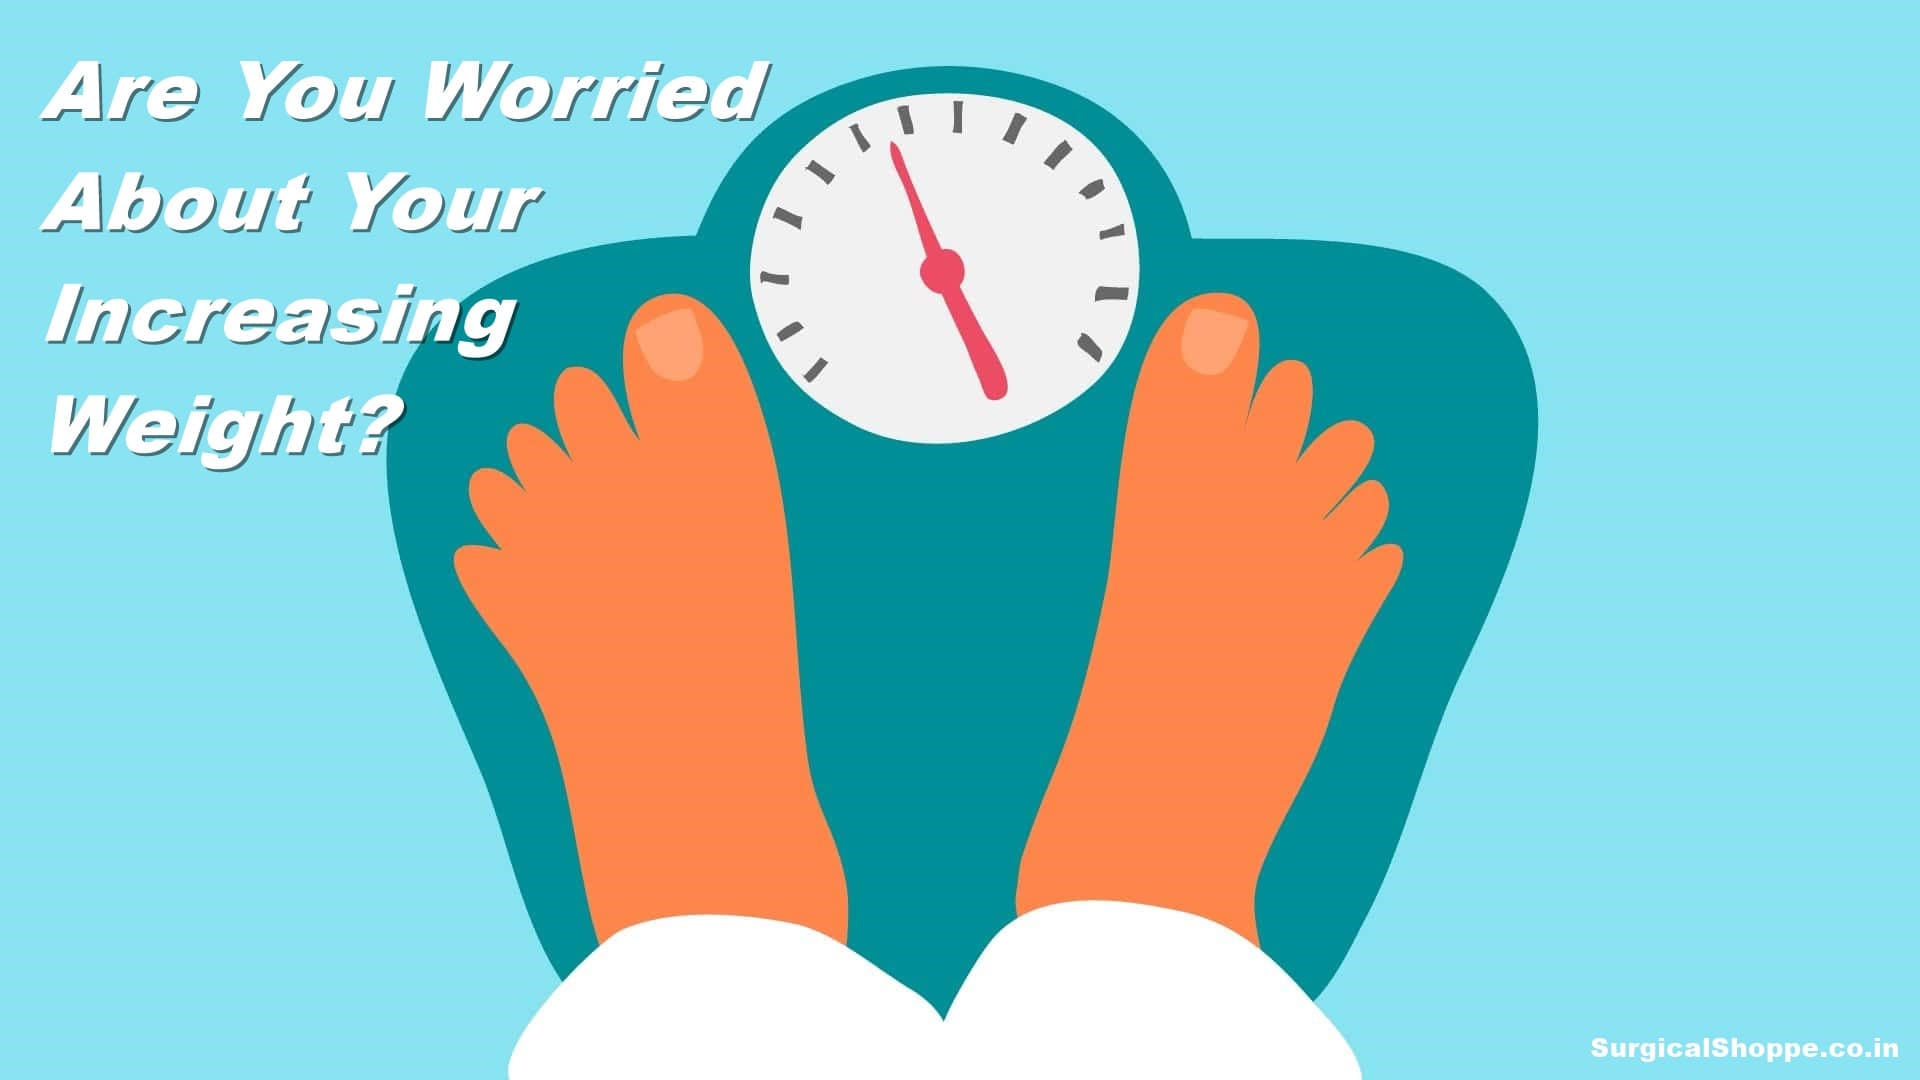 Are You Worried About Your Increasing Weight?